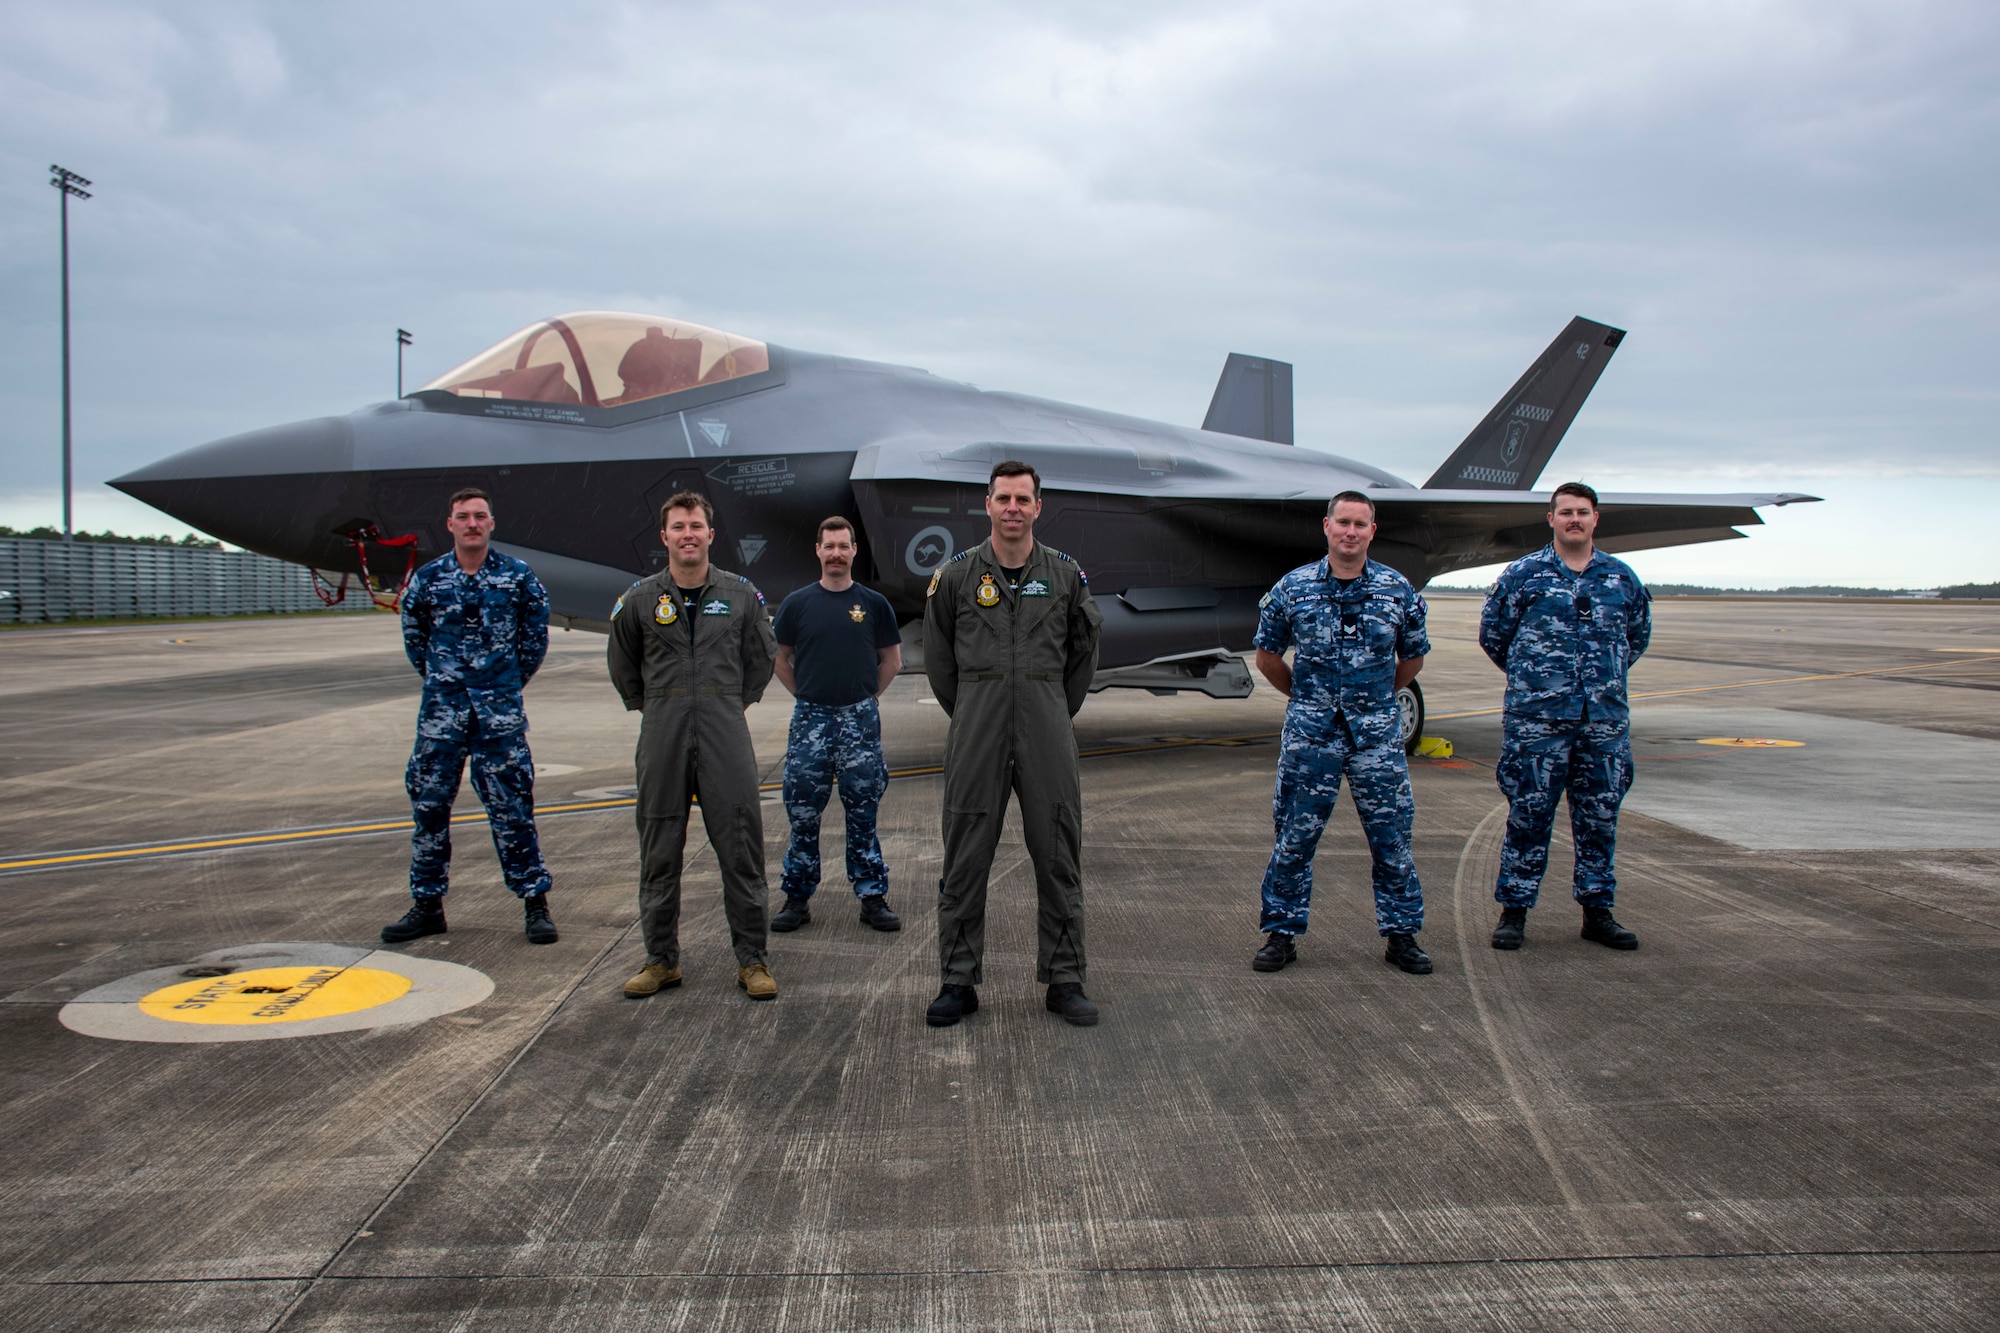 Wing Commander Tim Ireland, Commanding Officer of No 77 Squadron and F-35A pilot, stands alongside members of the Royal Australian Air Force in front of an F-35A Lightning II on Nov. 23, 2021, at Eglin Air Force Base, Fla. This is the second year No 77 Squadron has participated in Exercise Lightning Spear, a live-fire missile event supported by the 53rd Wing, that evaluates the entire unit on their ability to support the AIM-120D Advanced Medium Range Air-to-Air Missile combat capability of their F-35s. (U.S. Air Force photo by 1st Lt. Lindsey Heflin)